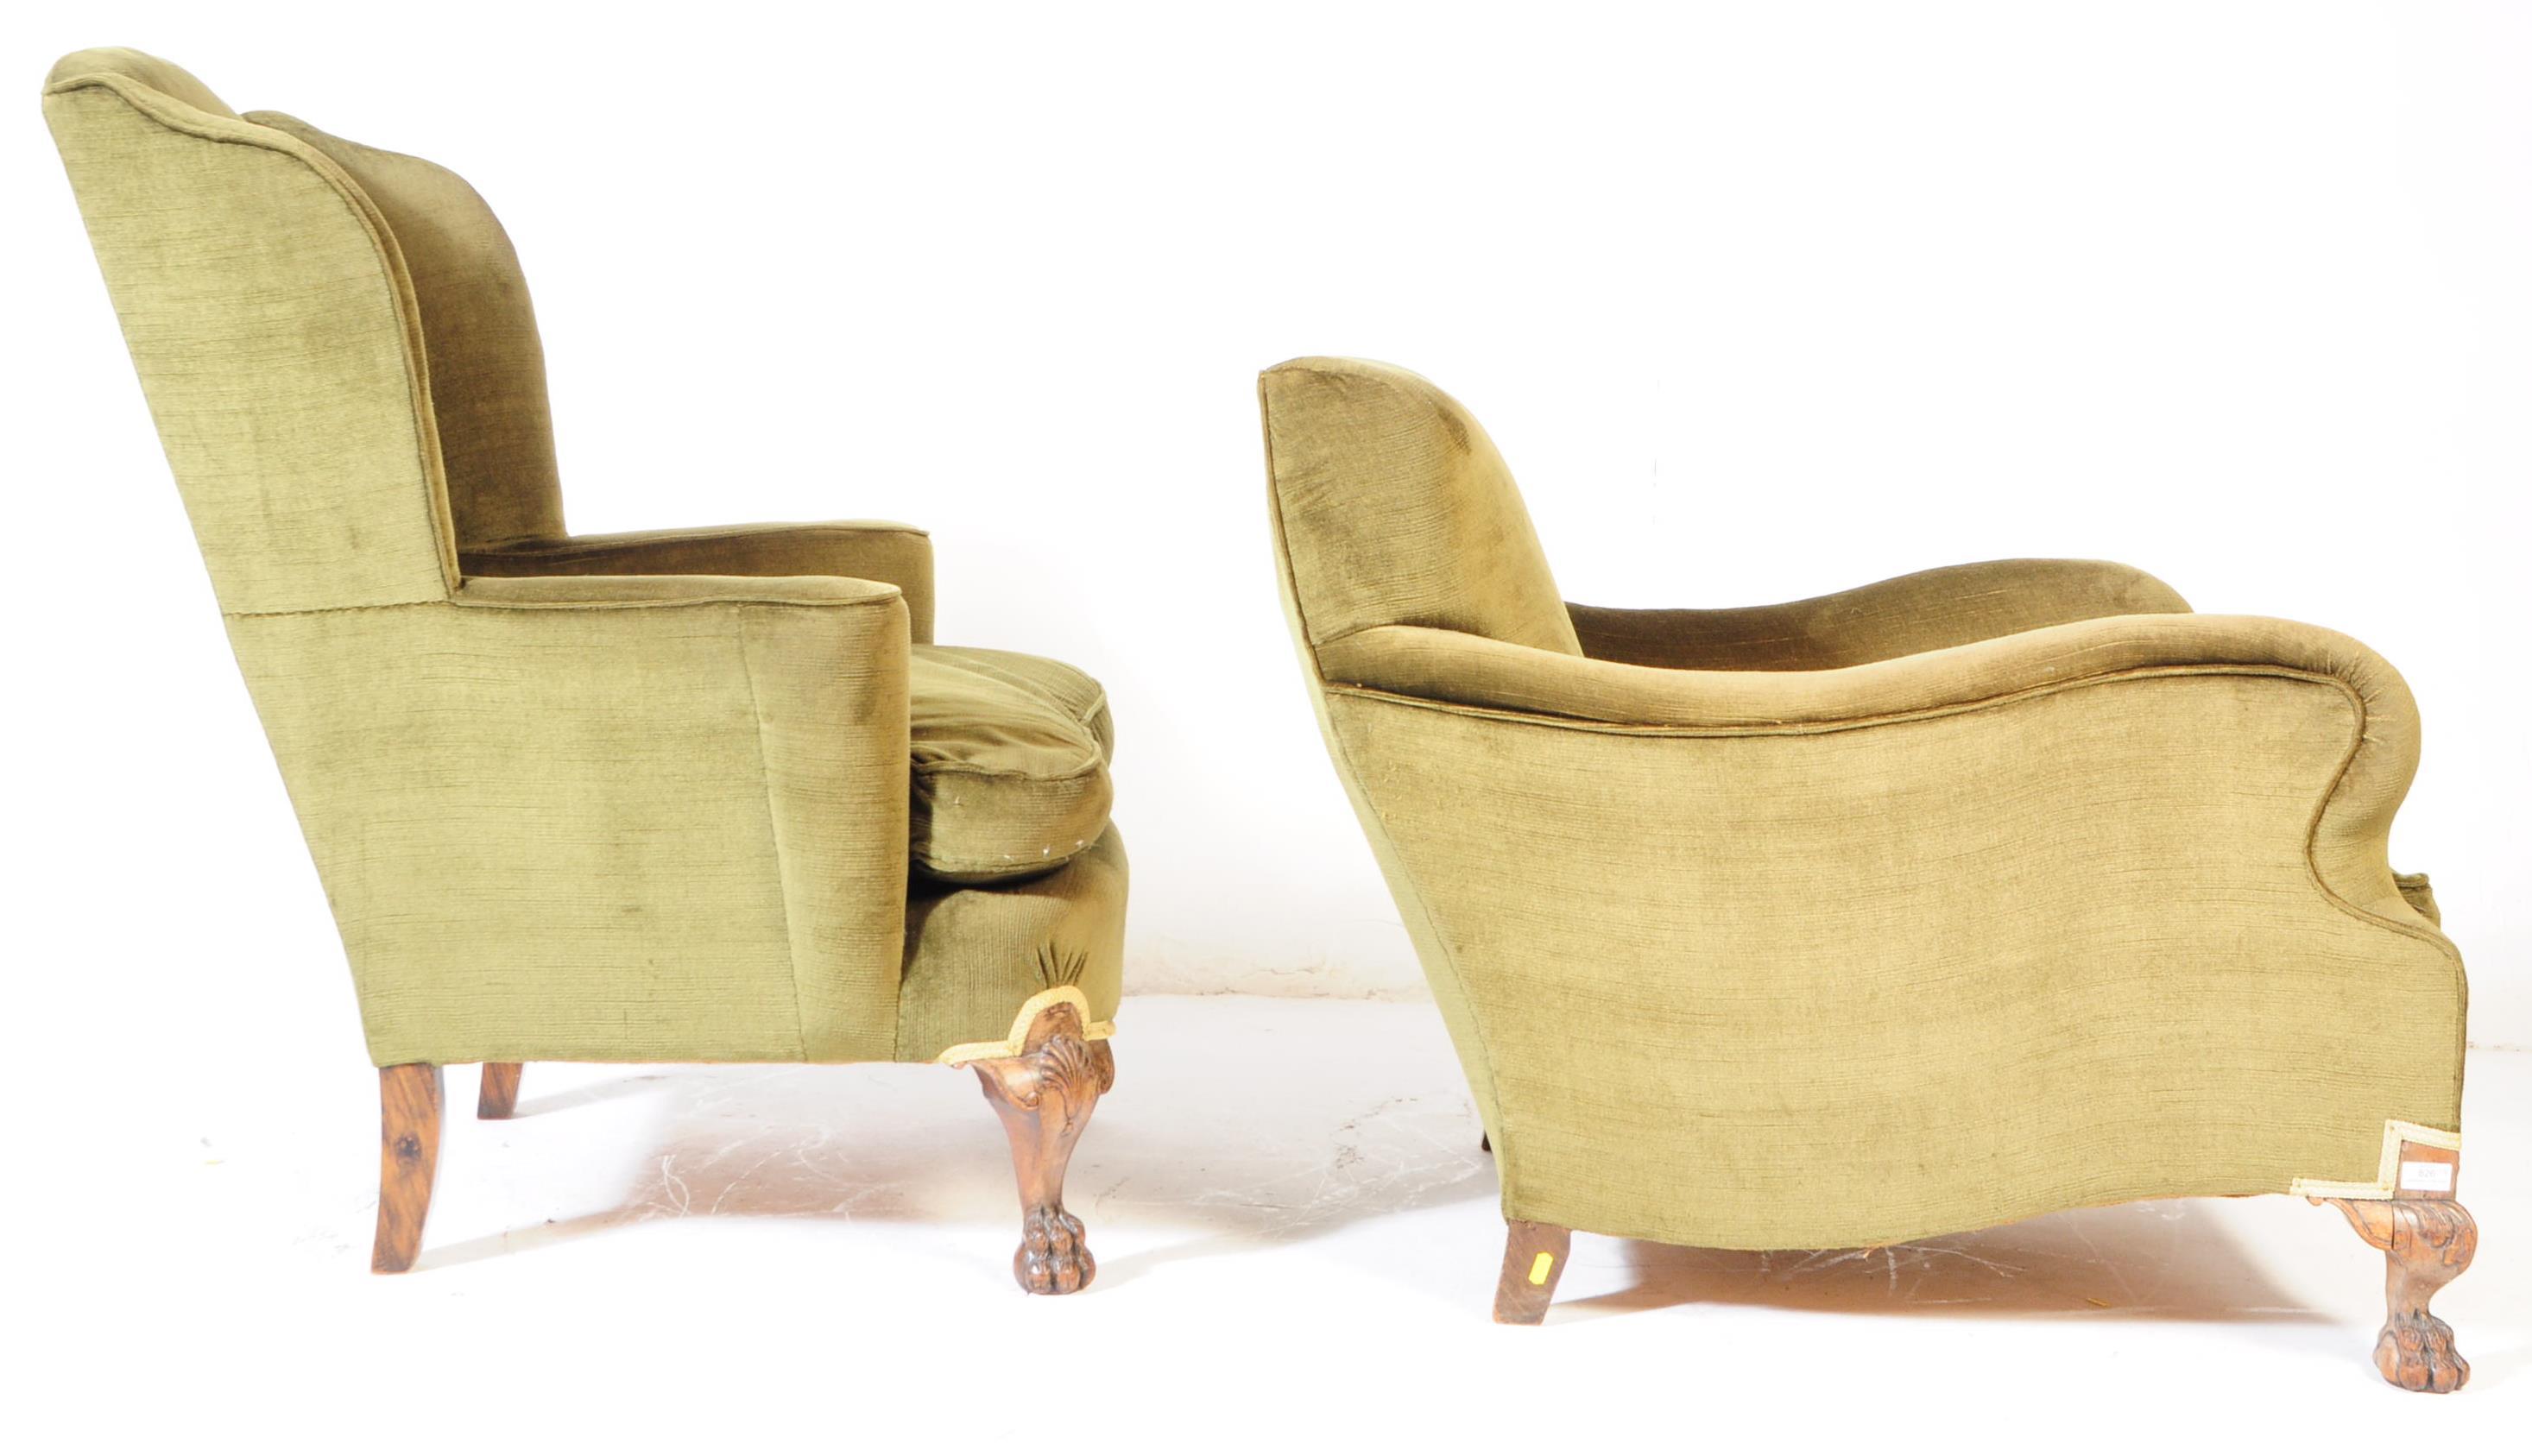 TWO VINTAGE 20TH CENTURY HIS & HERS FIRESIDE ARMCHAIRS - Image 2 of 7